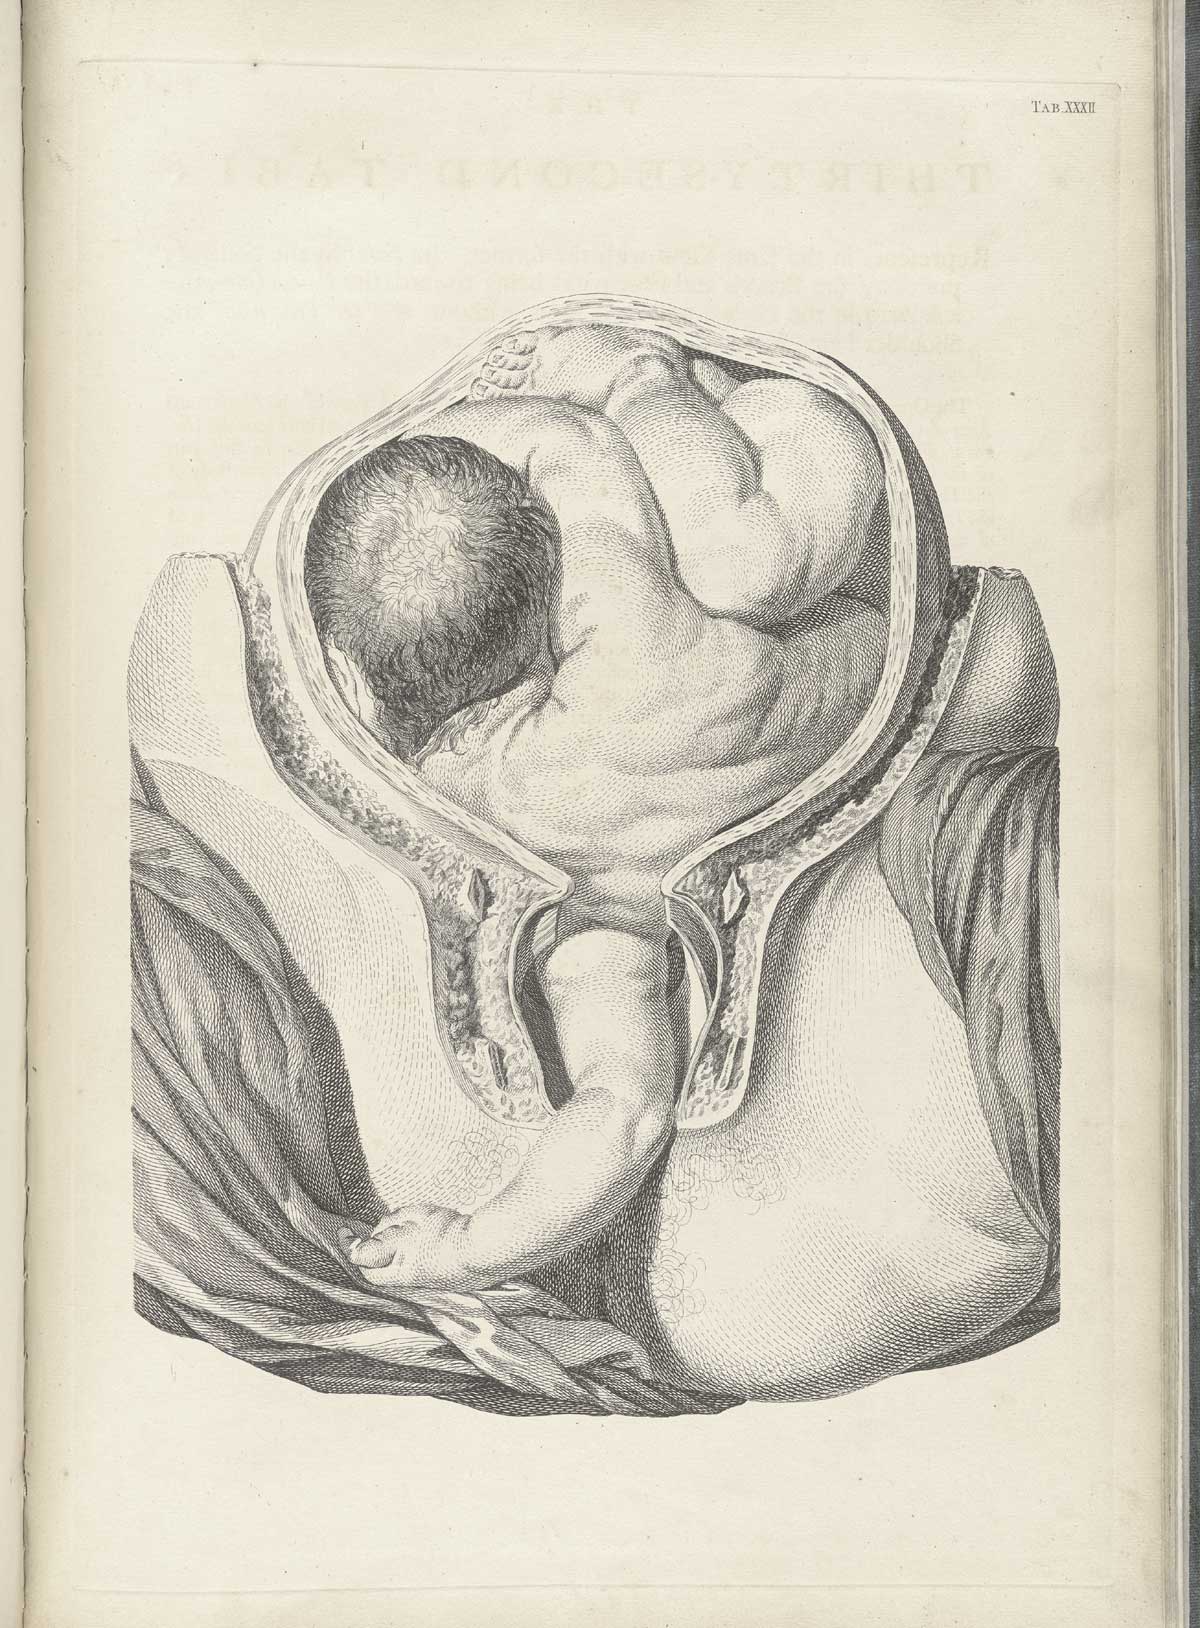 Table 32 of William Smellie's A sett of anatomical tables, with explanations, and an abridgment, of the practice of midwifery, featuring a baby in the uterus with its left arm in the birthing canal.